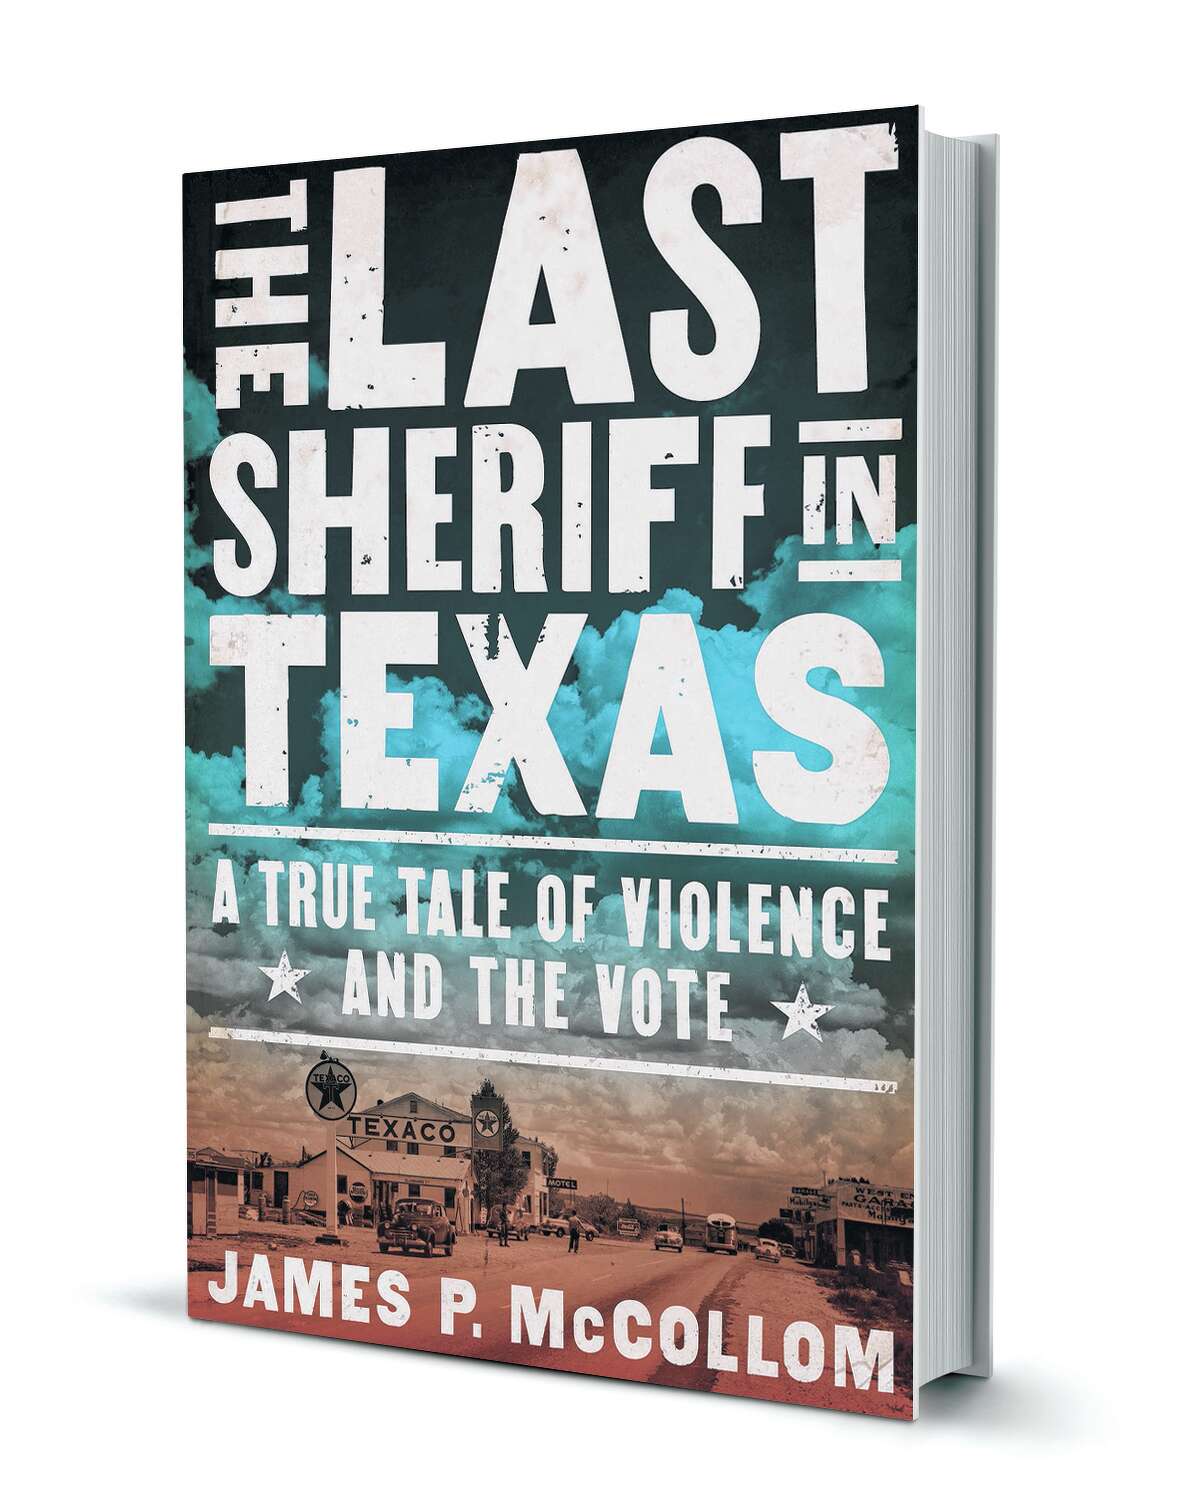 Book's dive into life of notorious Beeville sheriff Ennis resonates today